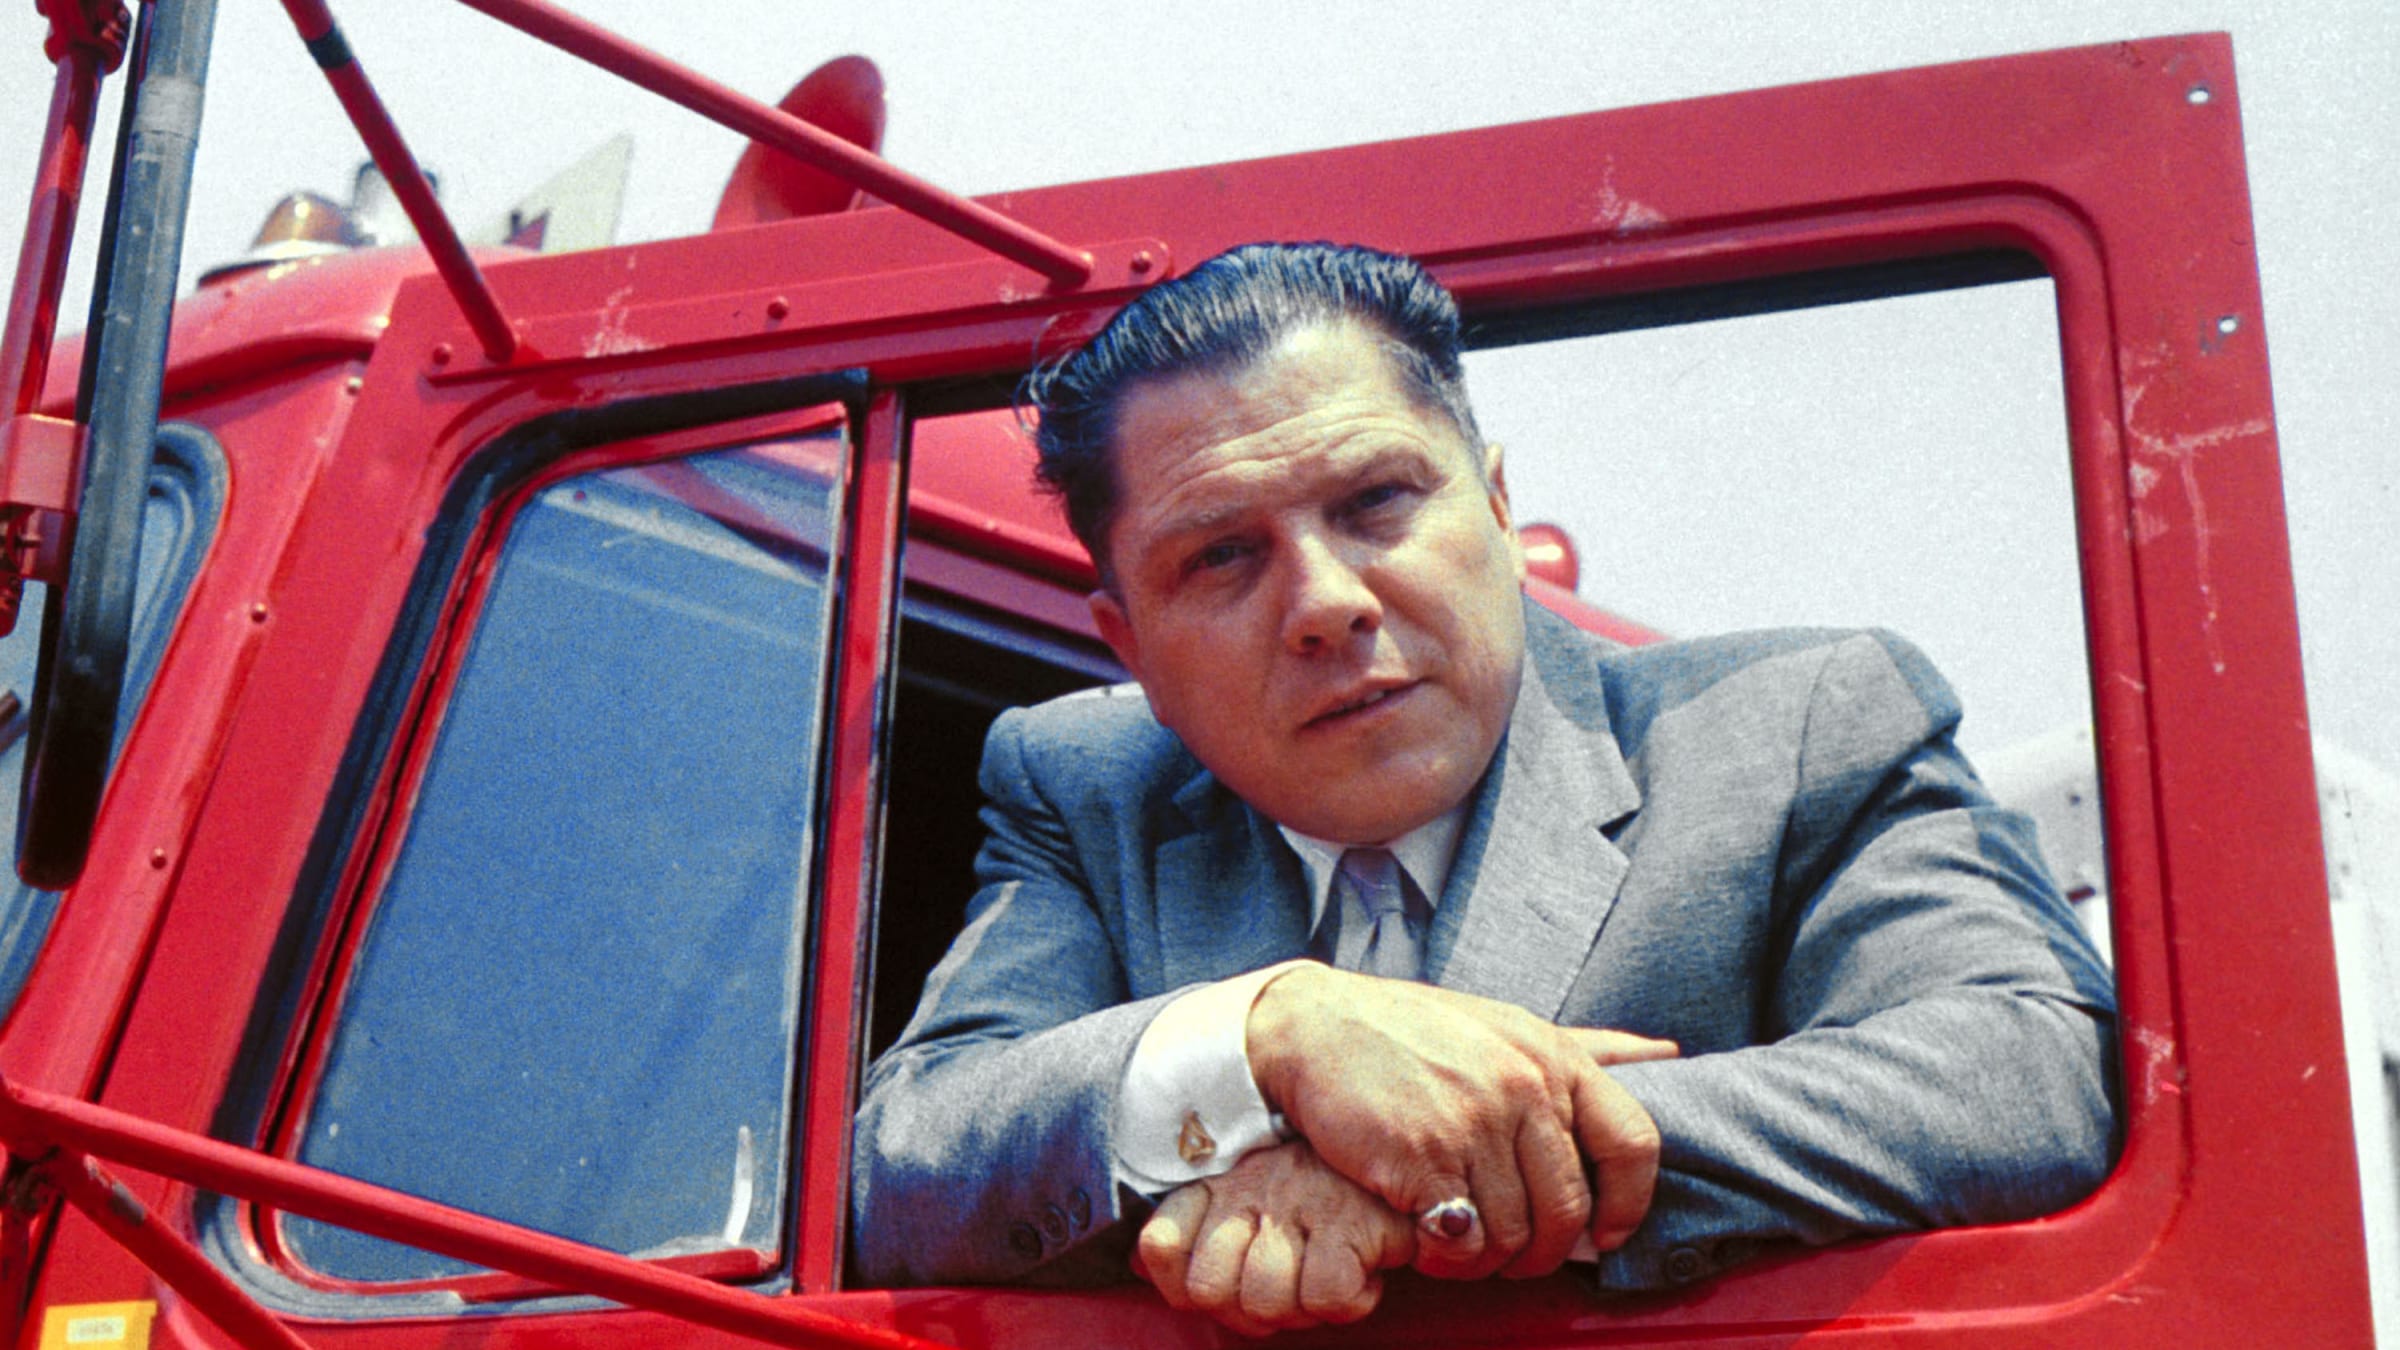 Jimmy Hoffa alive and kicking